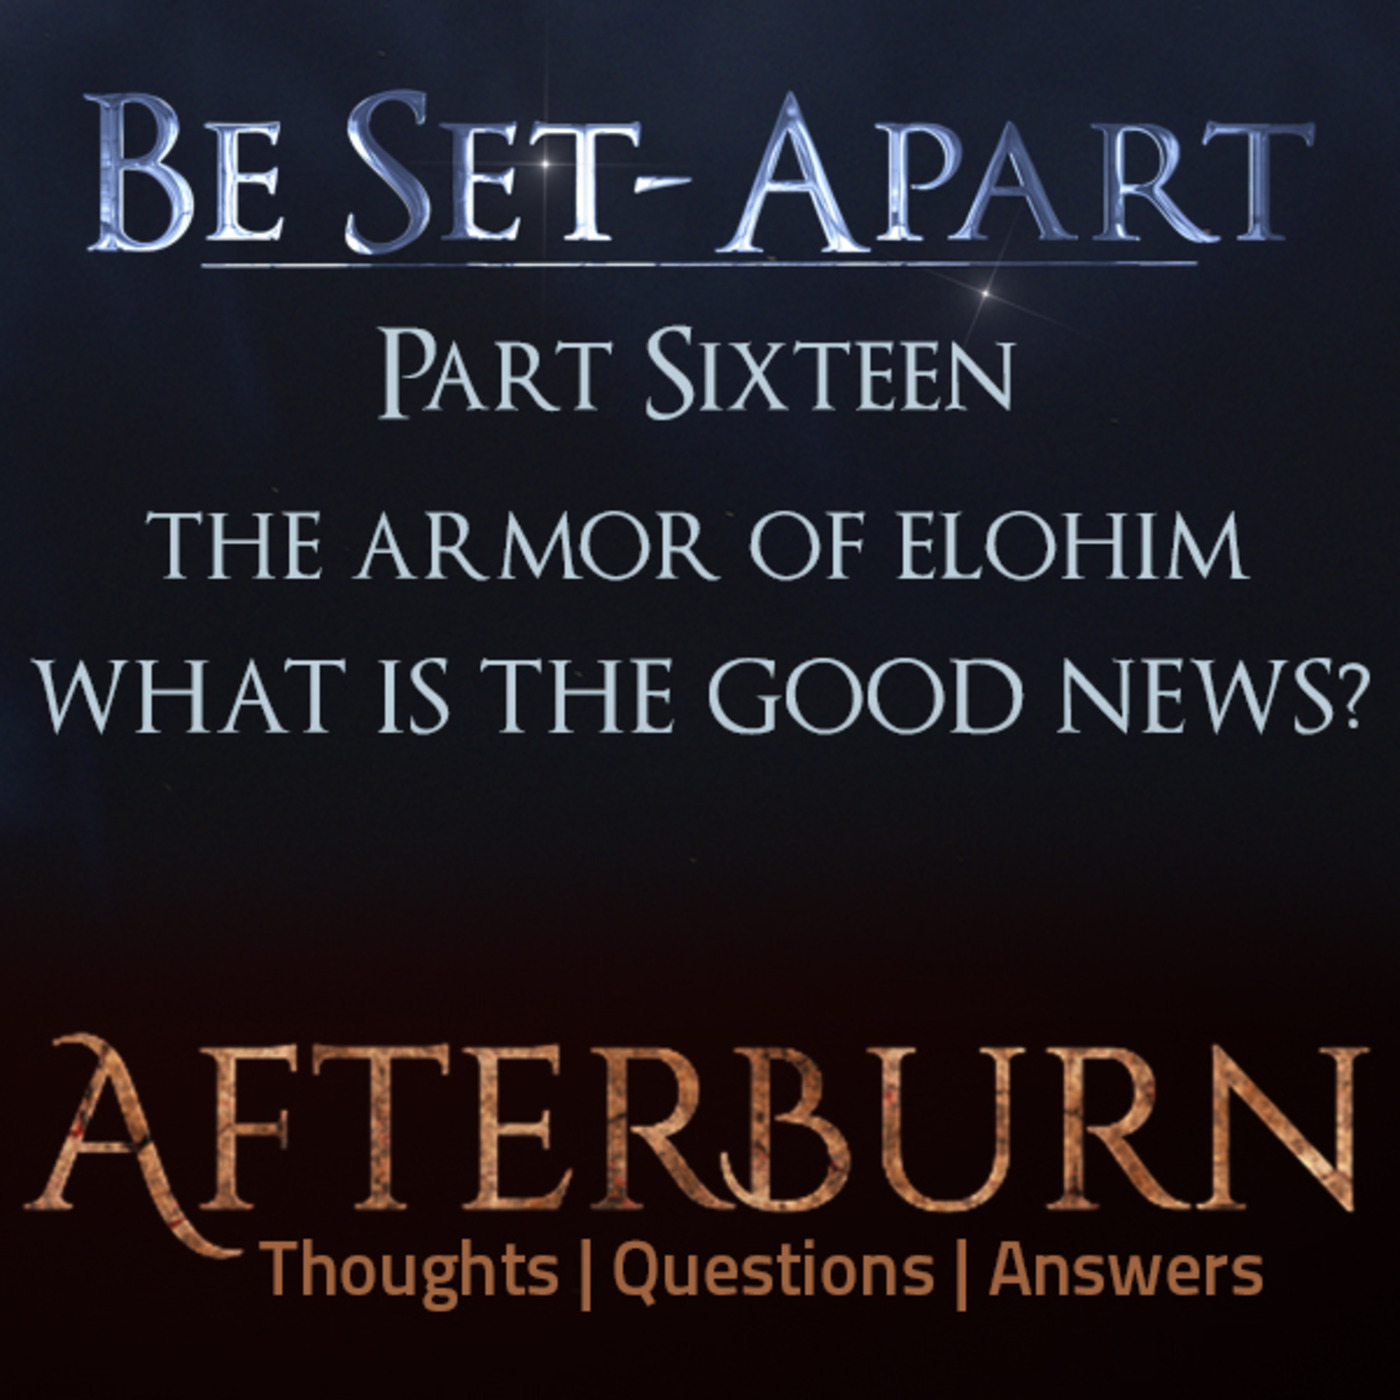 Episode 797: Afterburn | Thoughts, Q&A on Be Set-Apart | Part Sixteen | What is the Good News?